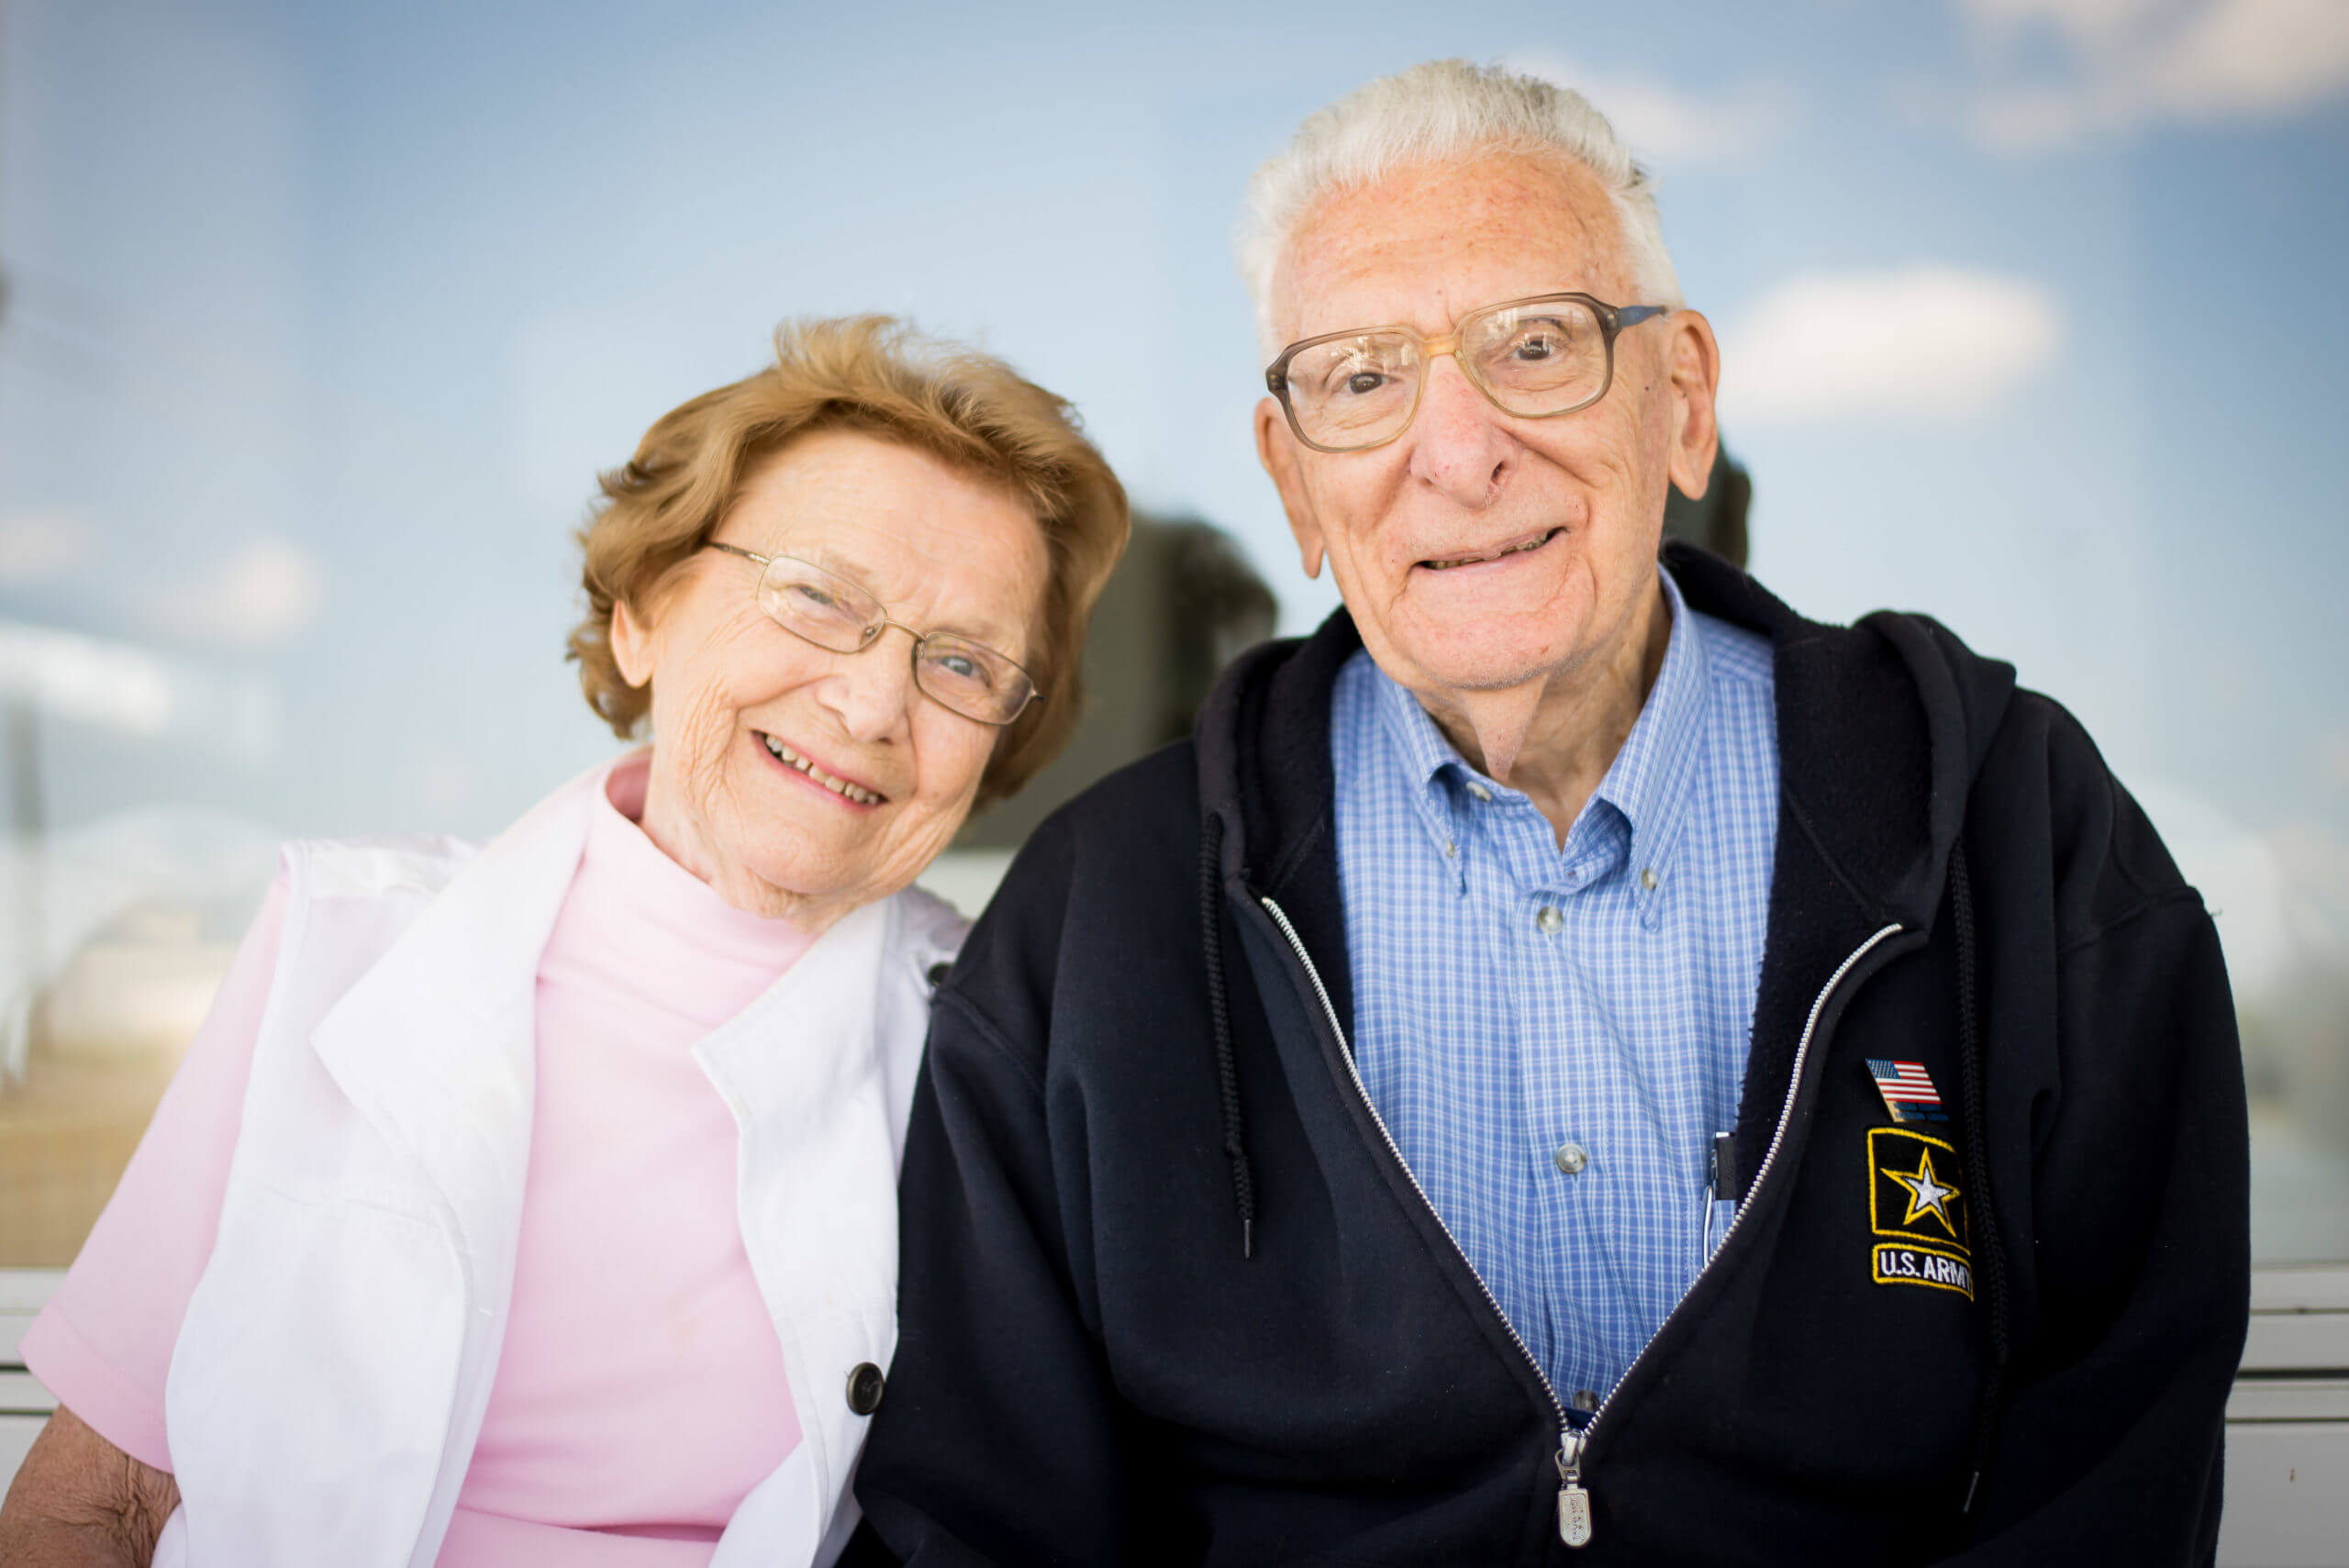 A portrait of an older couple smiling. The woman leans toward the man. The man wears a sweatshirt with a US Army patch.